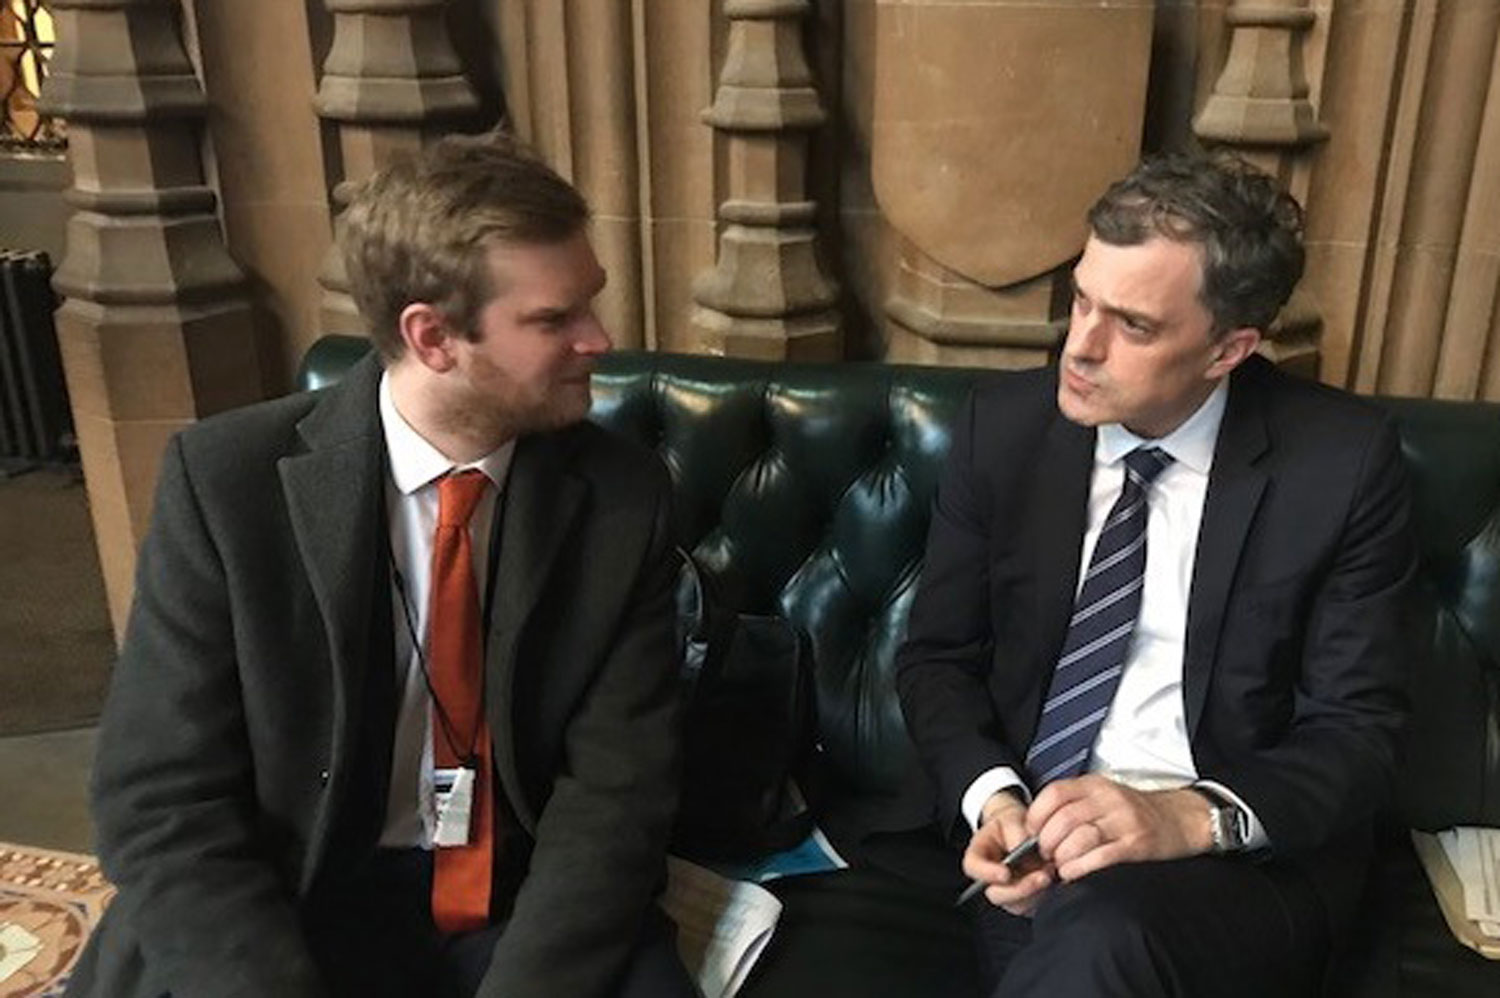 Julian Smith MP recently met with James Calder, Head of Public Affairs at the Society of Independent Brewers, in Westminster, to discuss the breweries in the constituency and the impact of government policy.